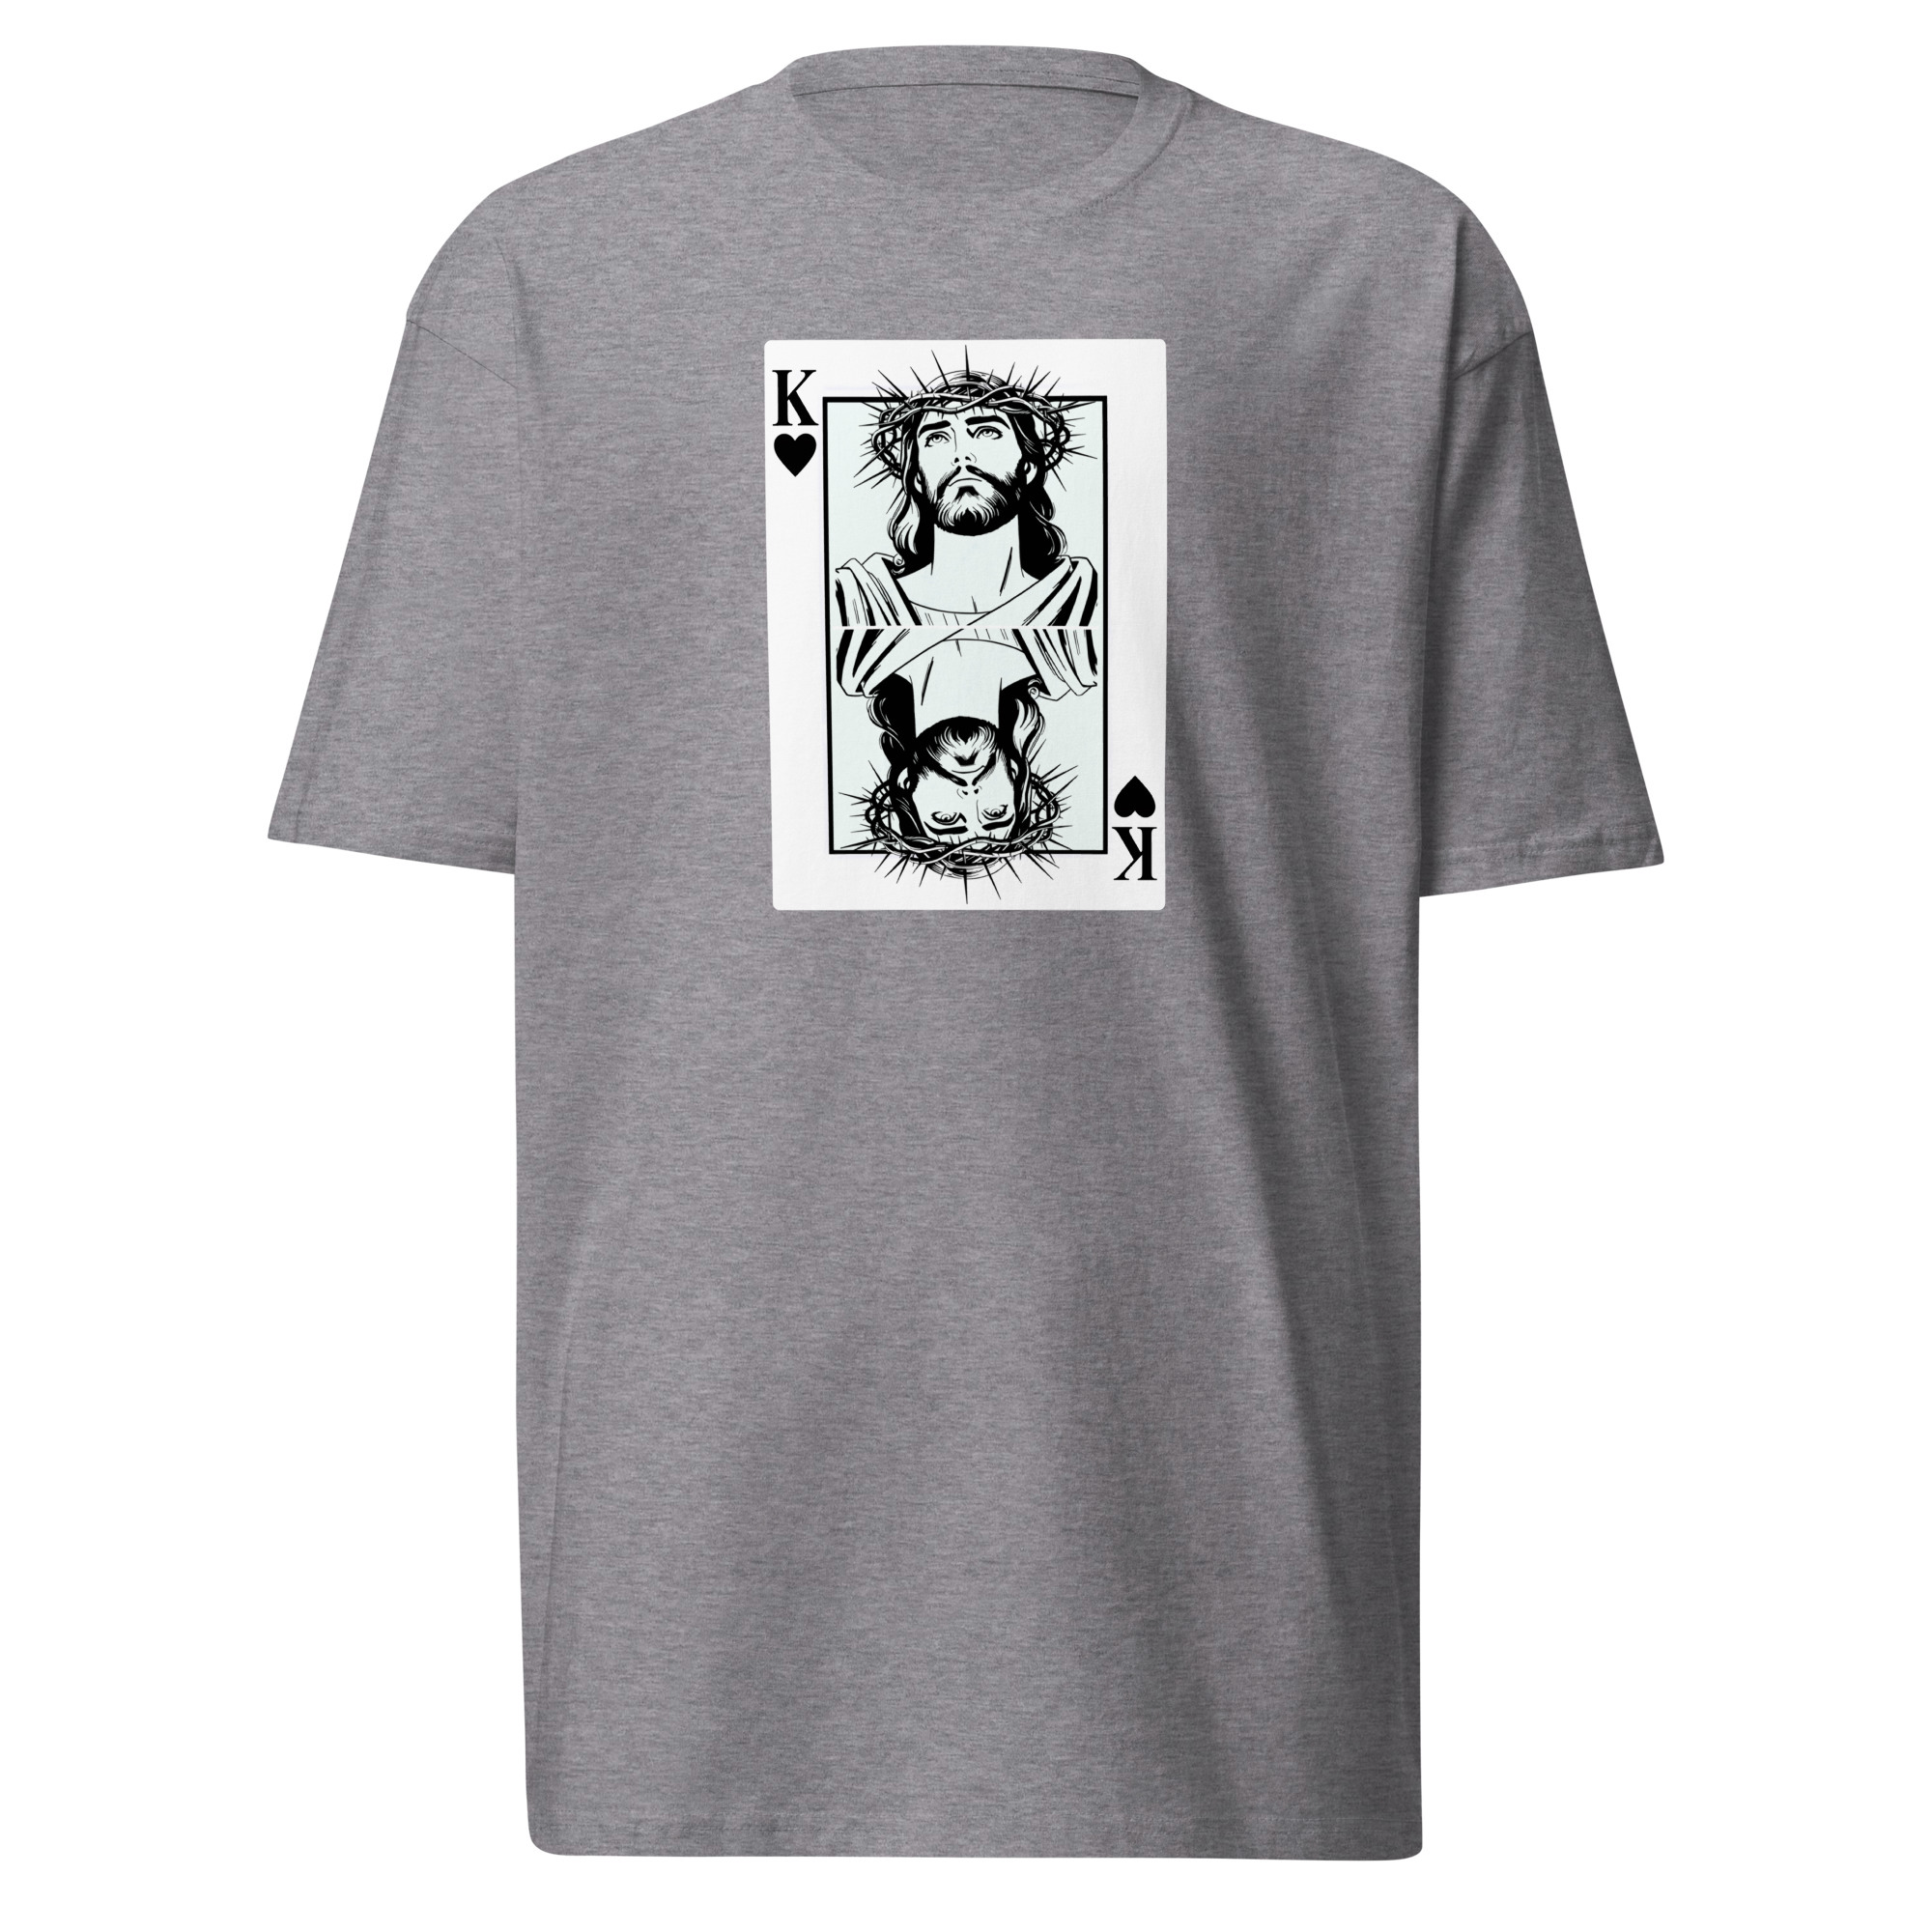 King of King's T-Shirt - Carbon Grey / L